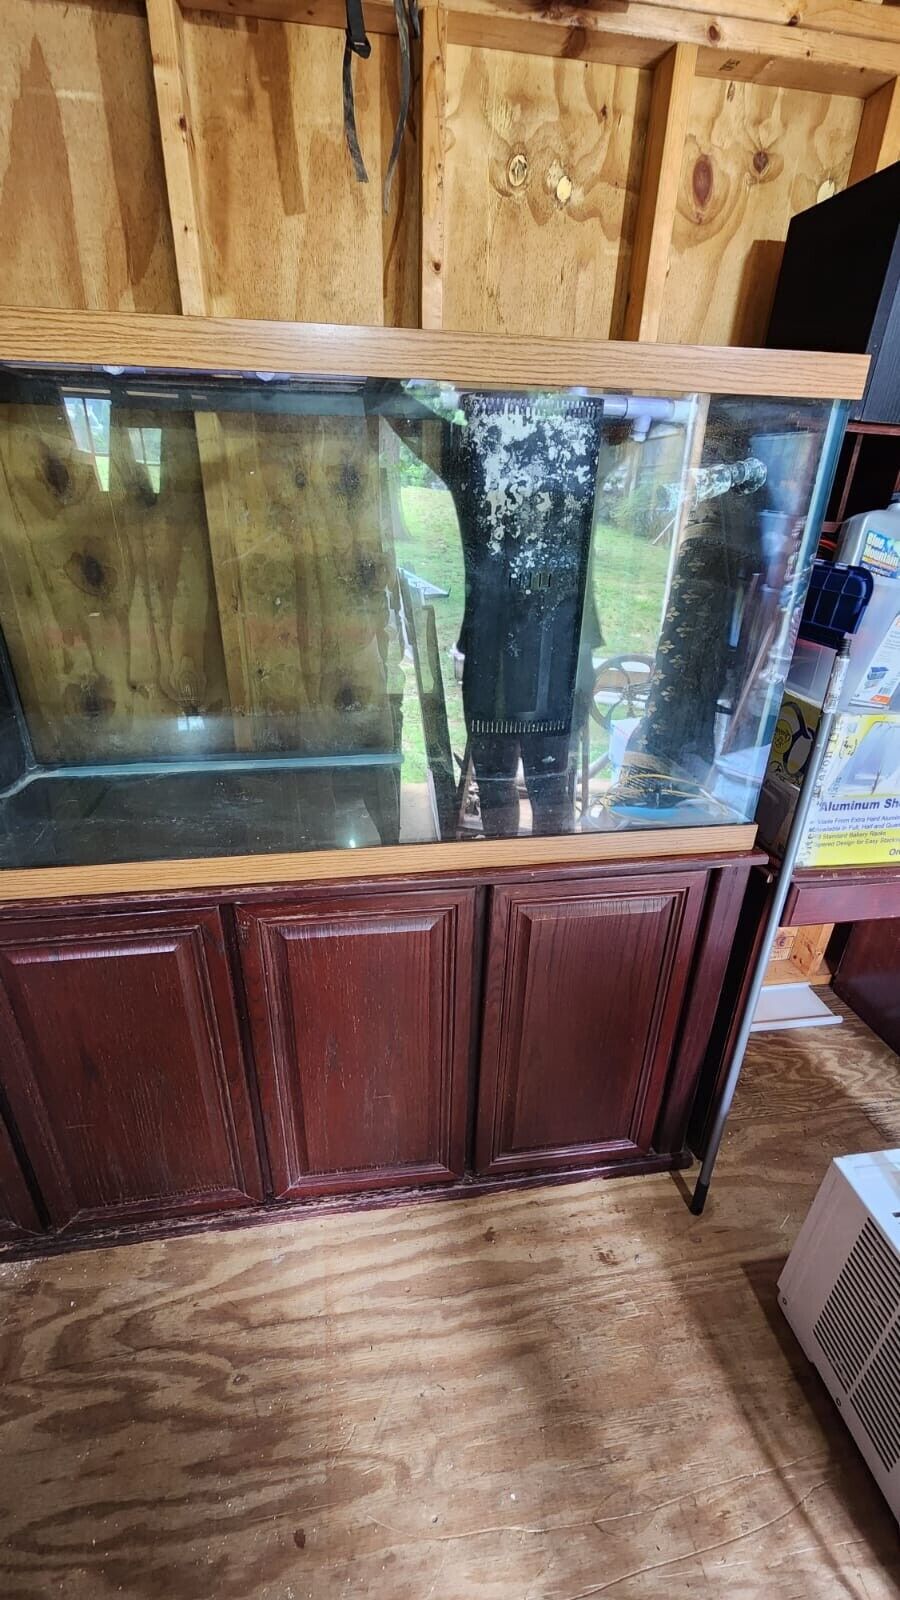 150 Gallon Reef Ready Aquarium (150lbs Dry Live Rock and Substrate Included)